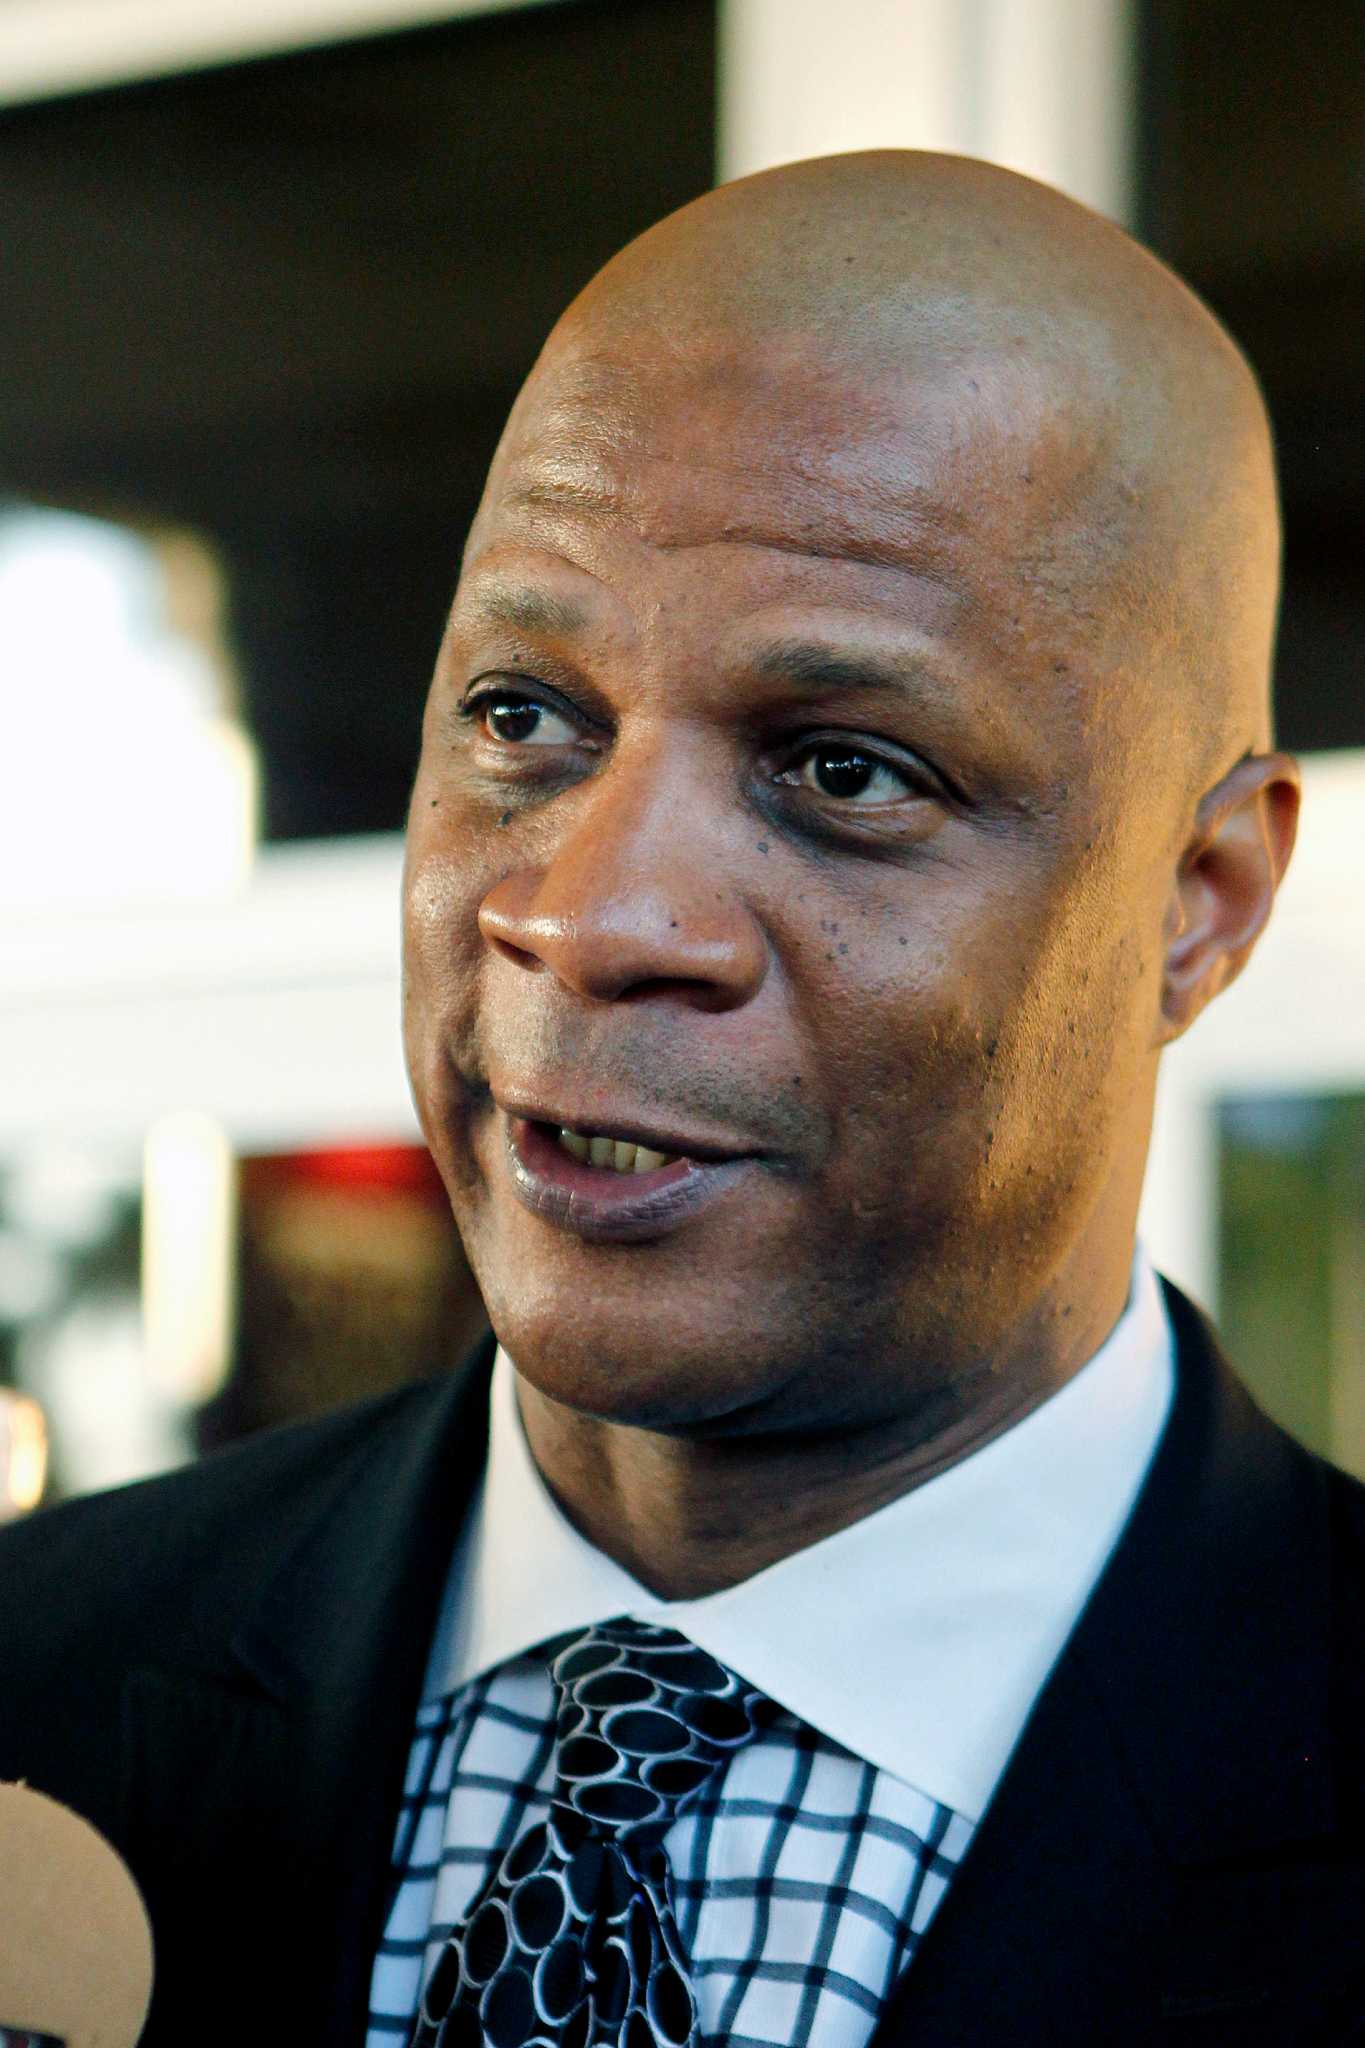 The IRS is selling Darryl Strawberry's deferred Mets salary 